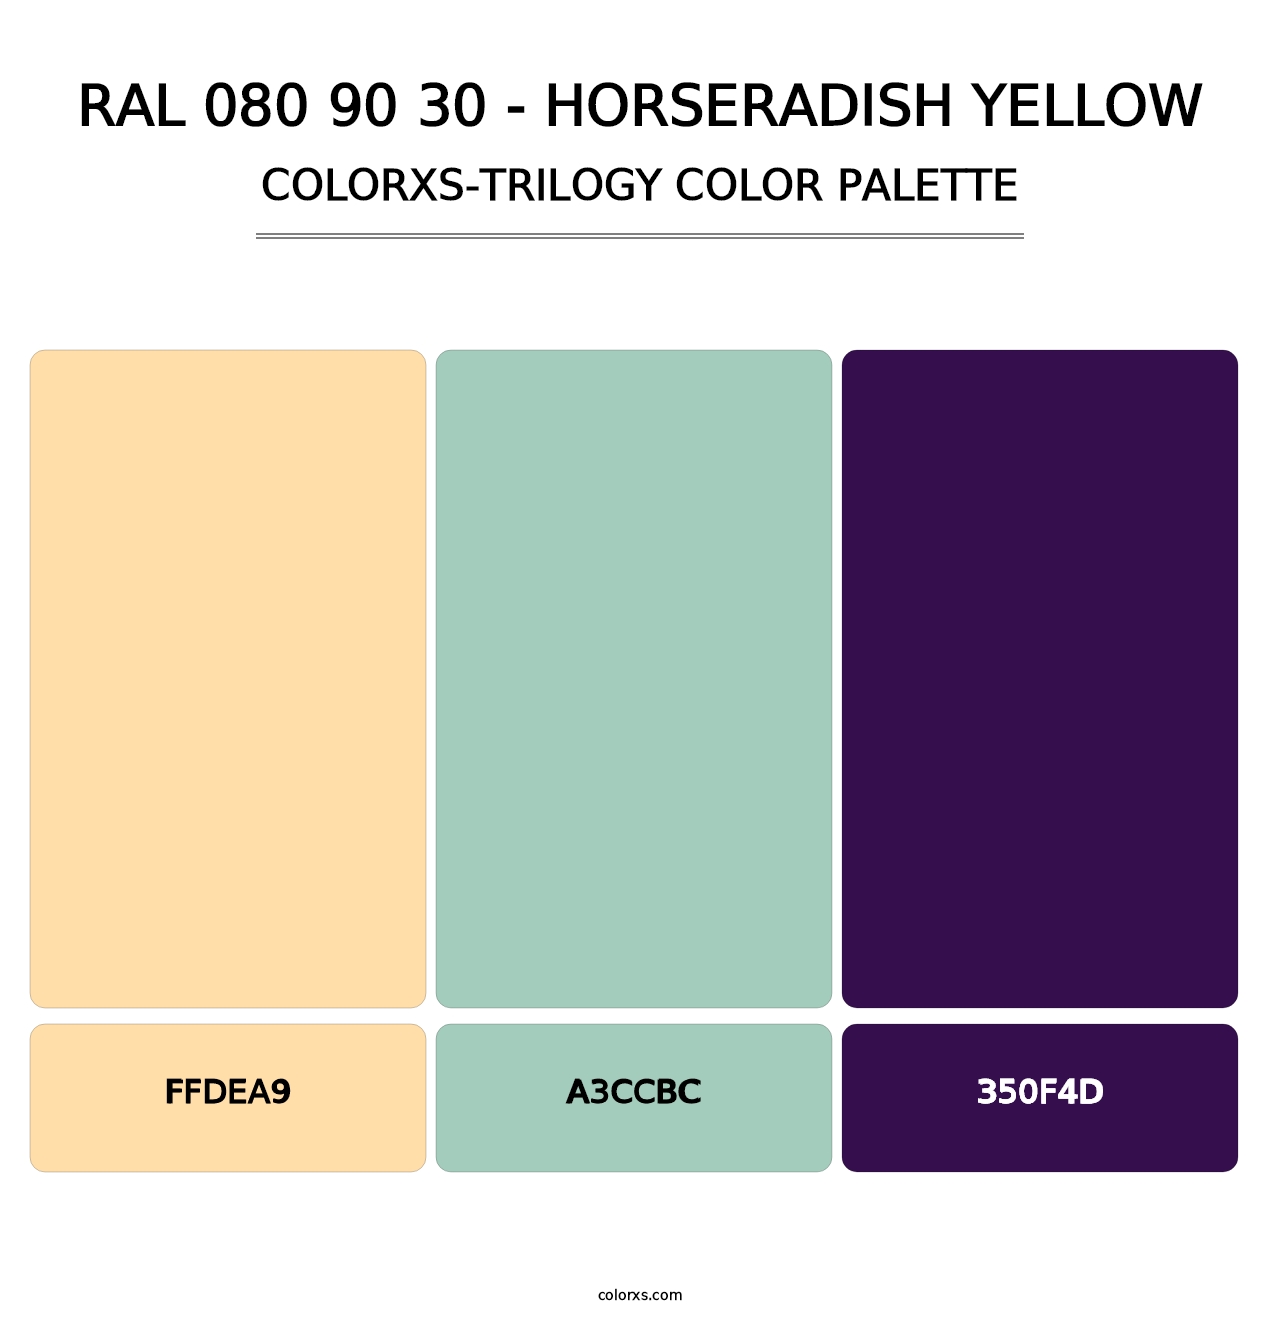 RAL 080 90 30 - Horseradish Yellow - Colorxs Trilogy Palette